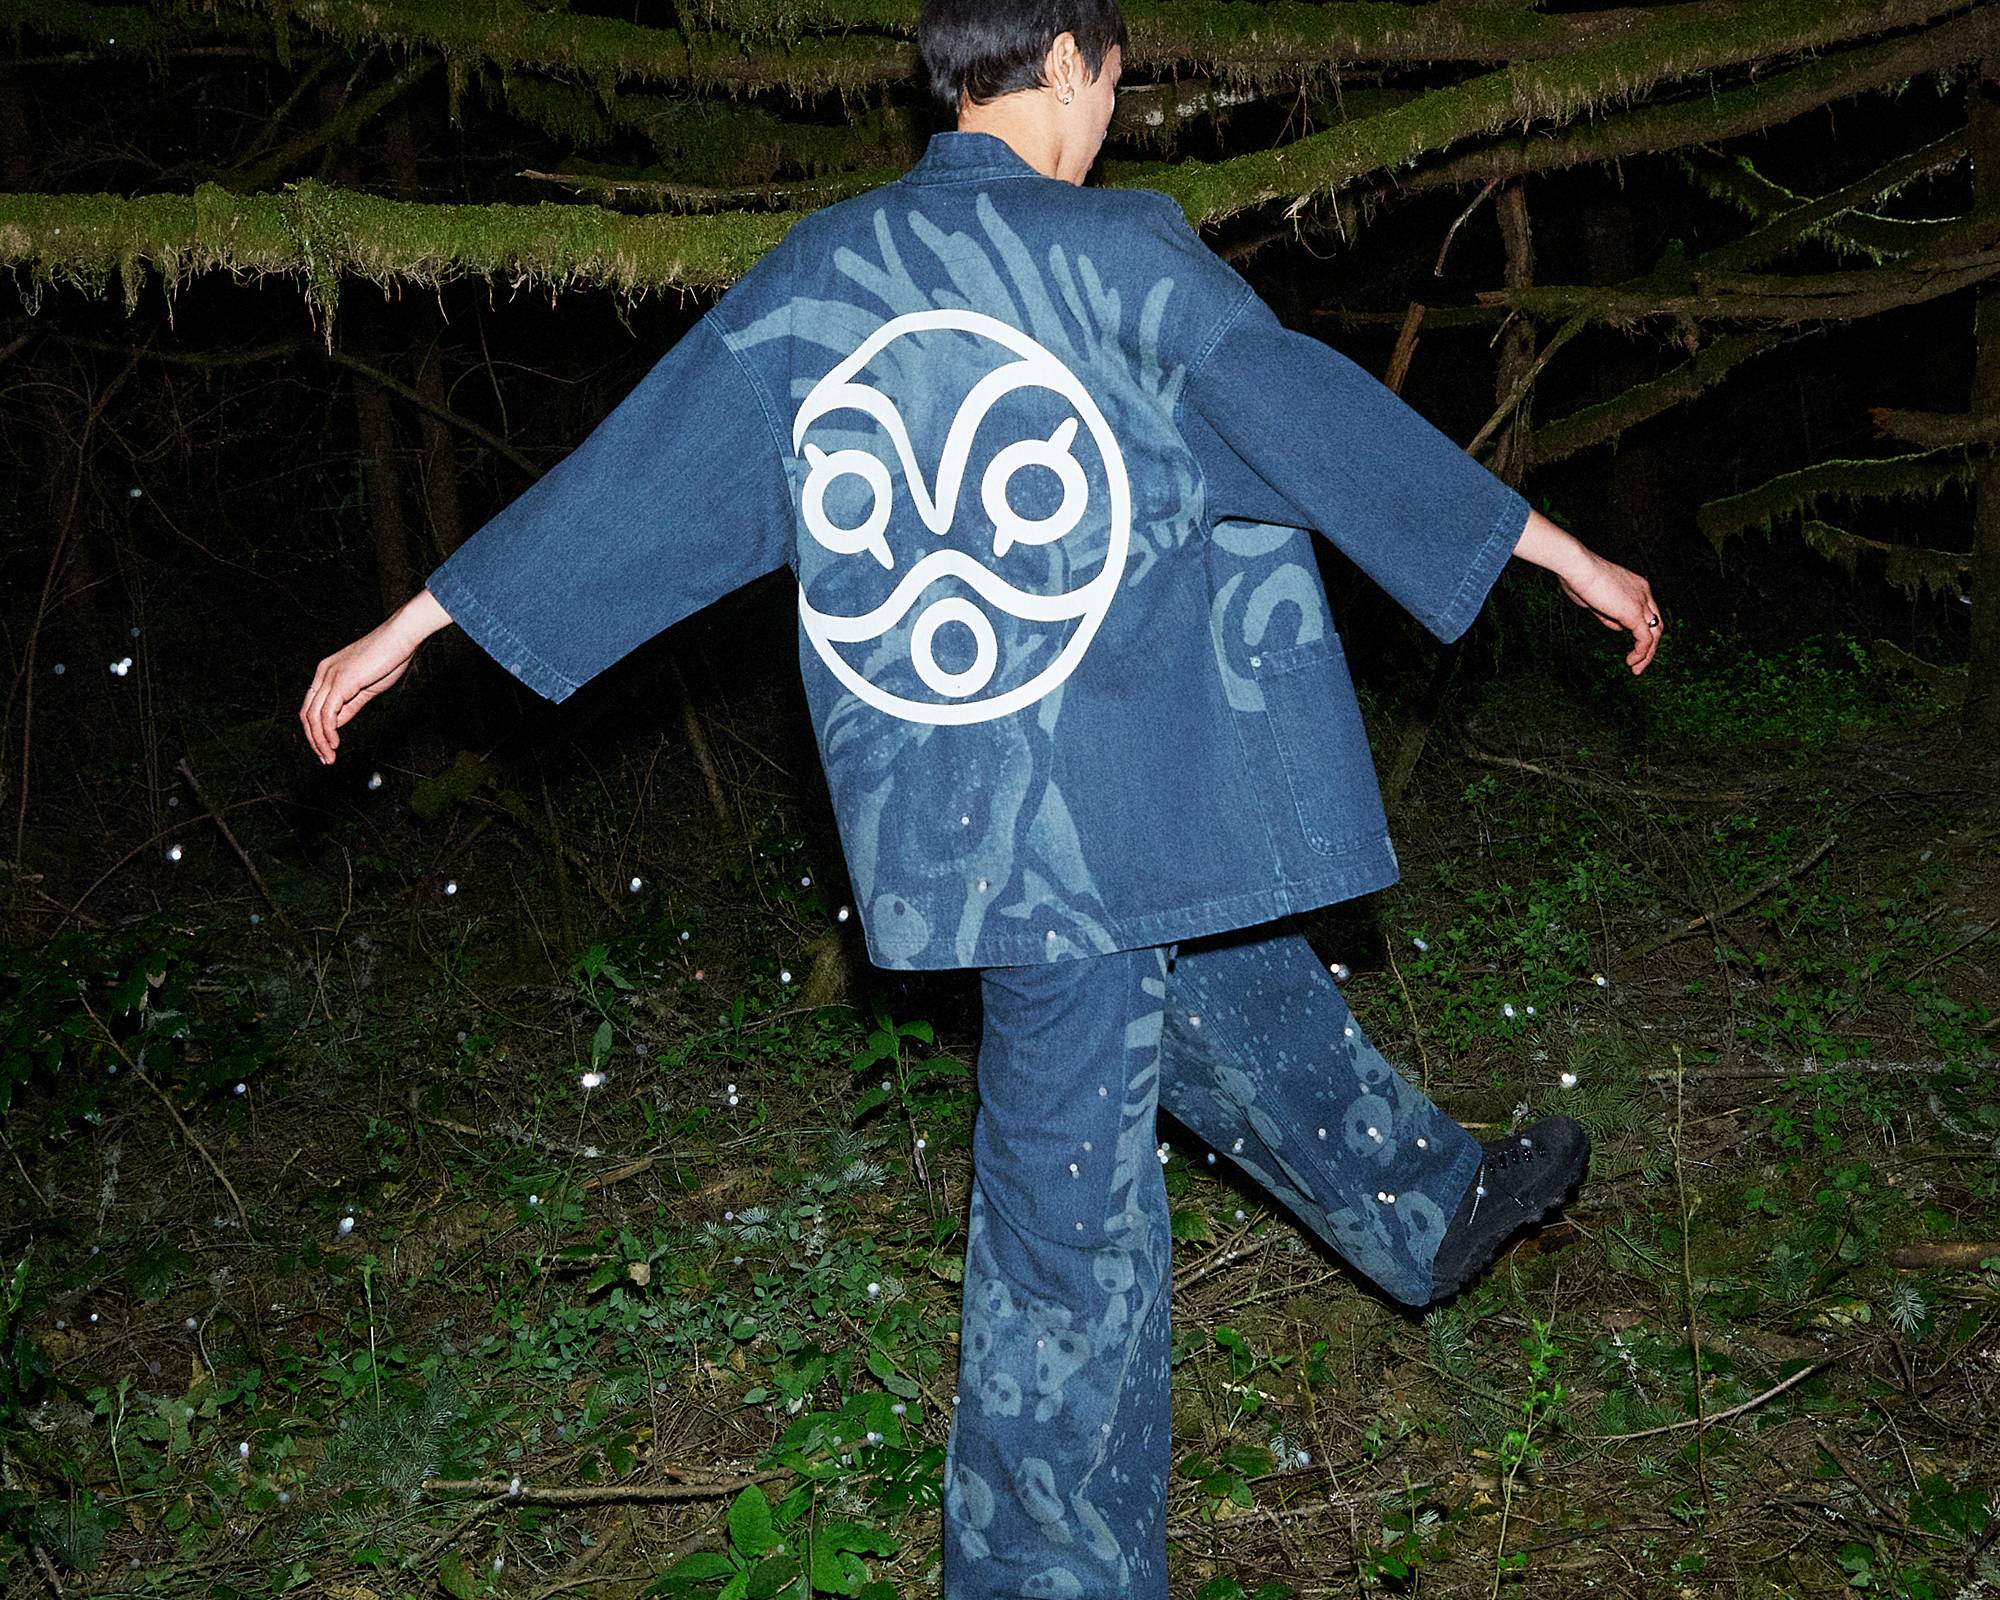 Image of woman wearing Levi's® x Princess Mononoke collection pieces and walking in nightime forest setting